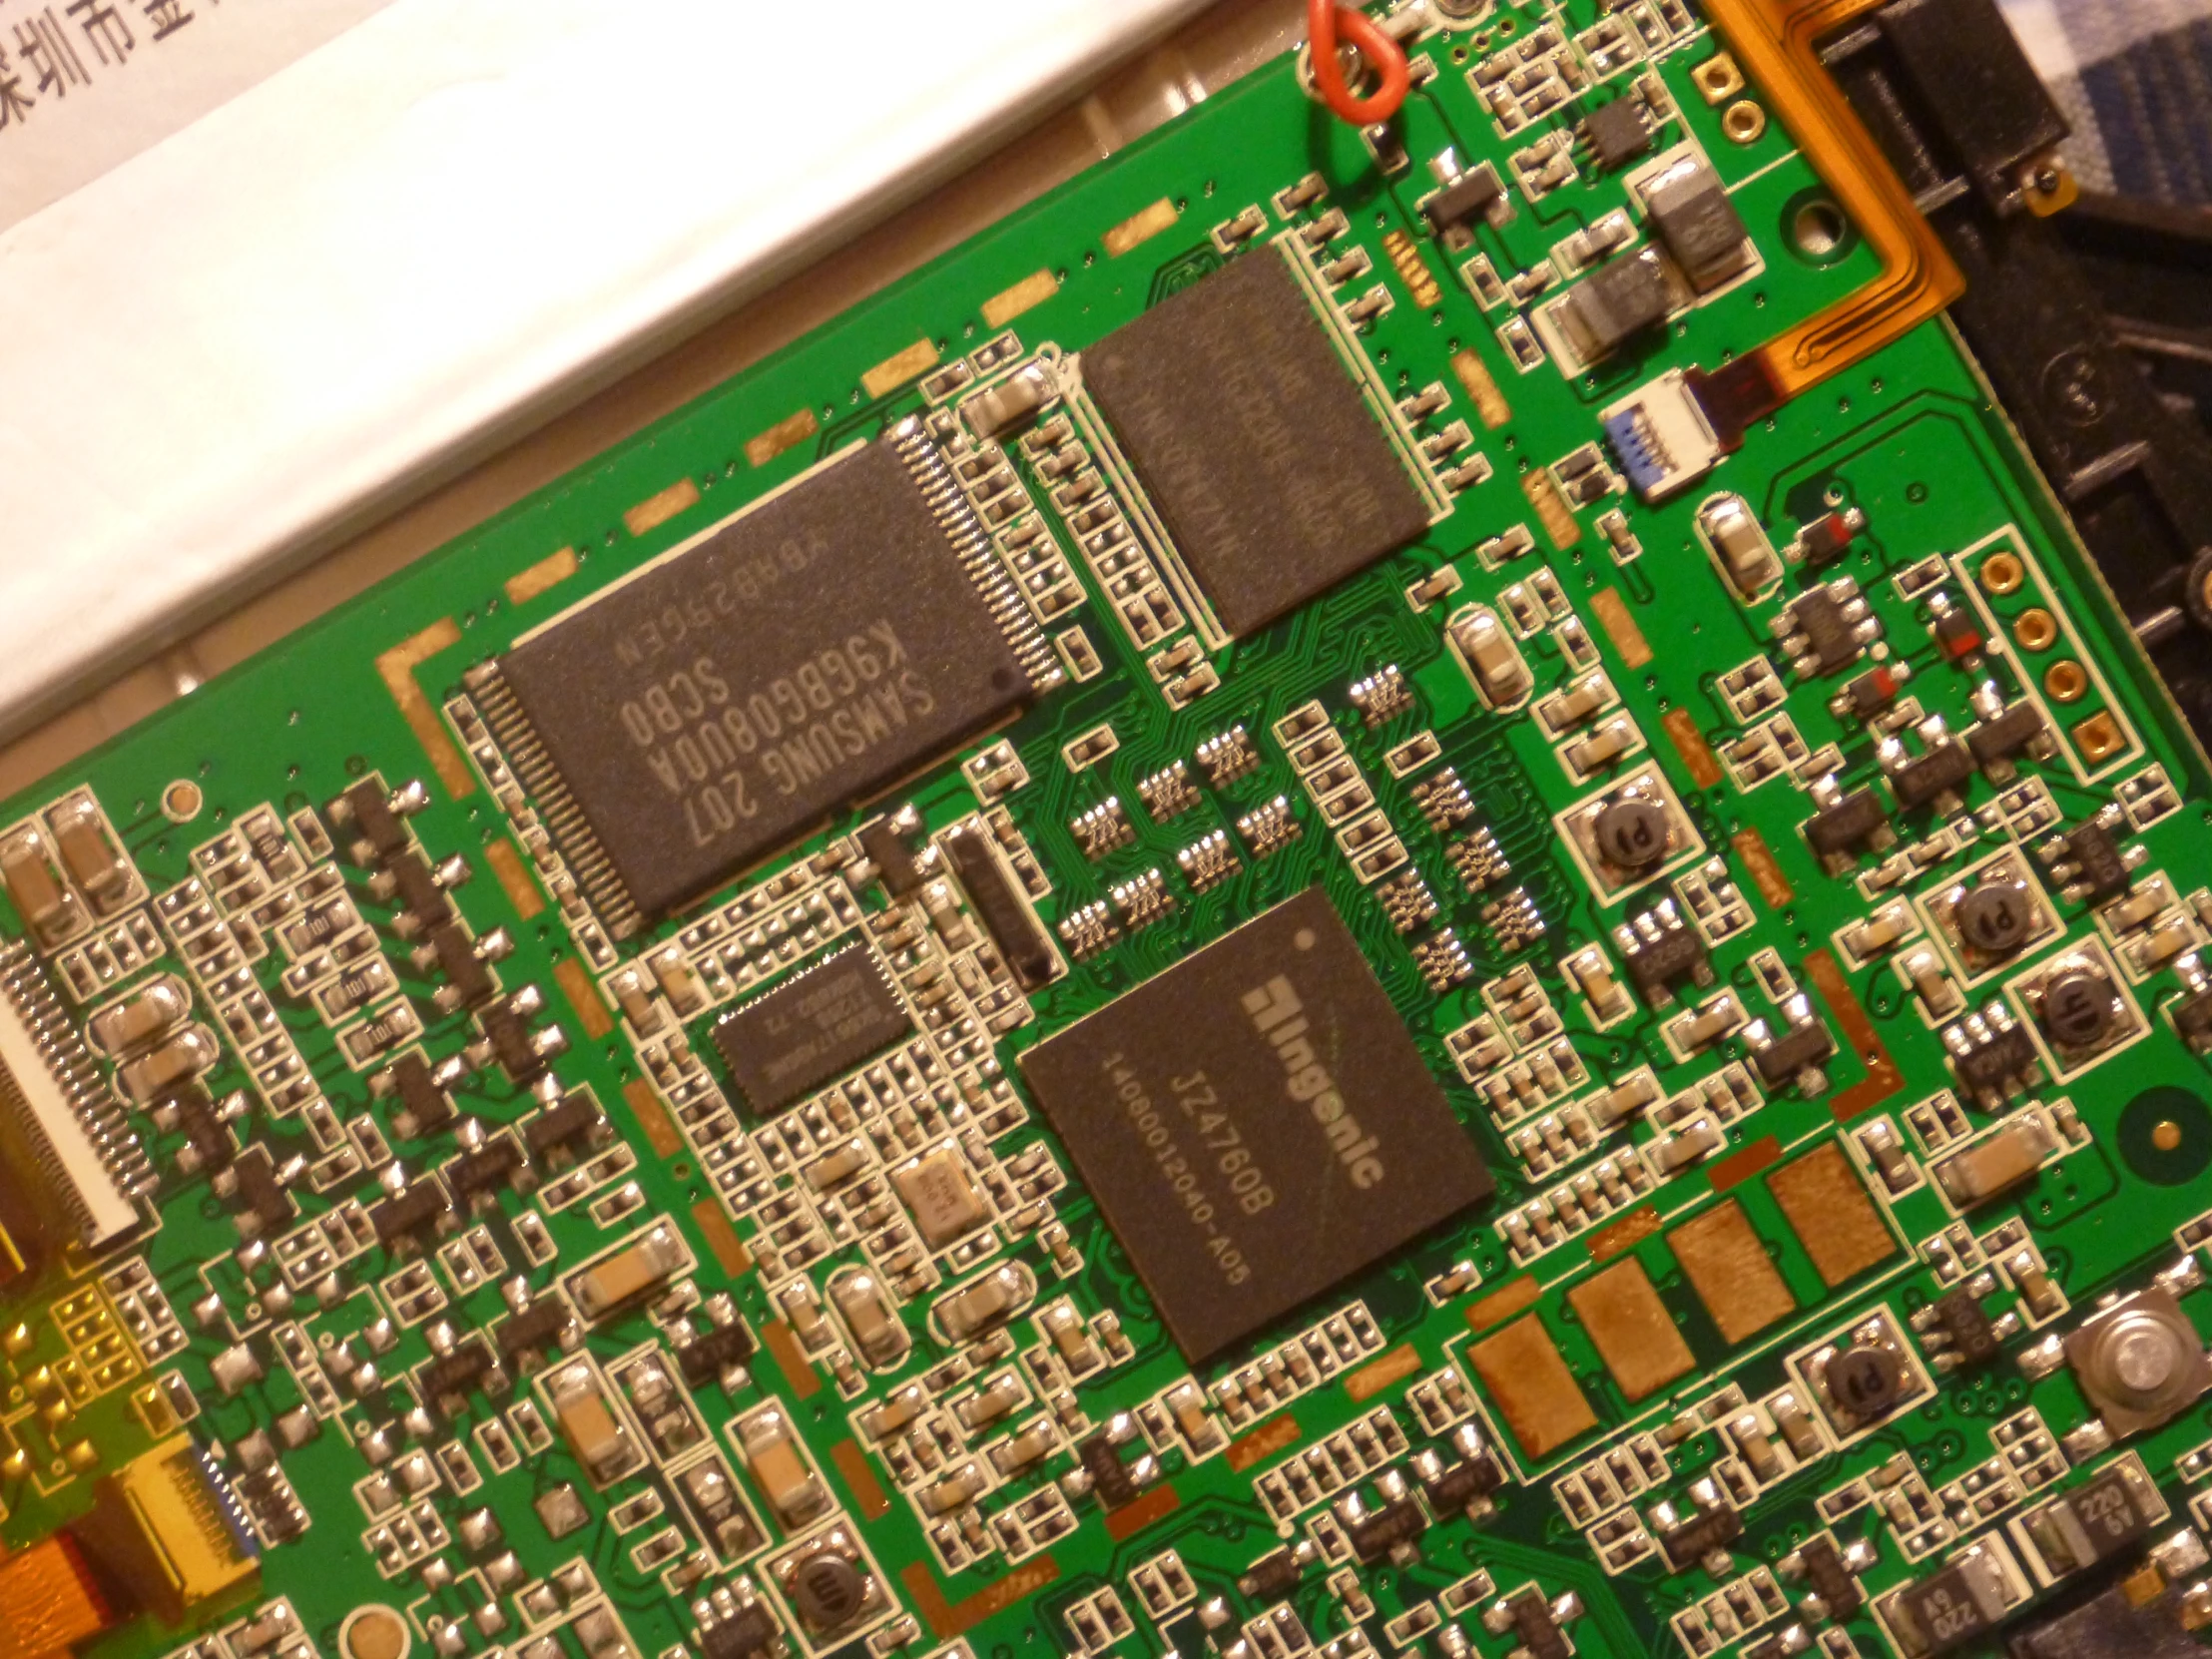 a close up view of a printed circuit board